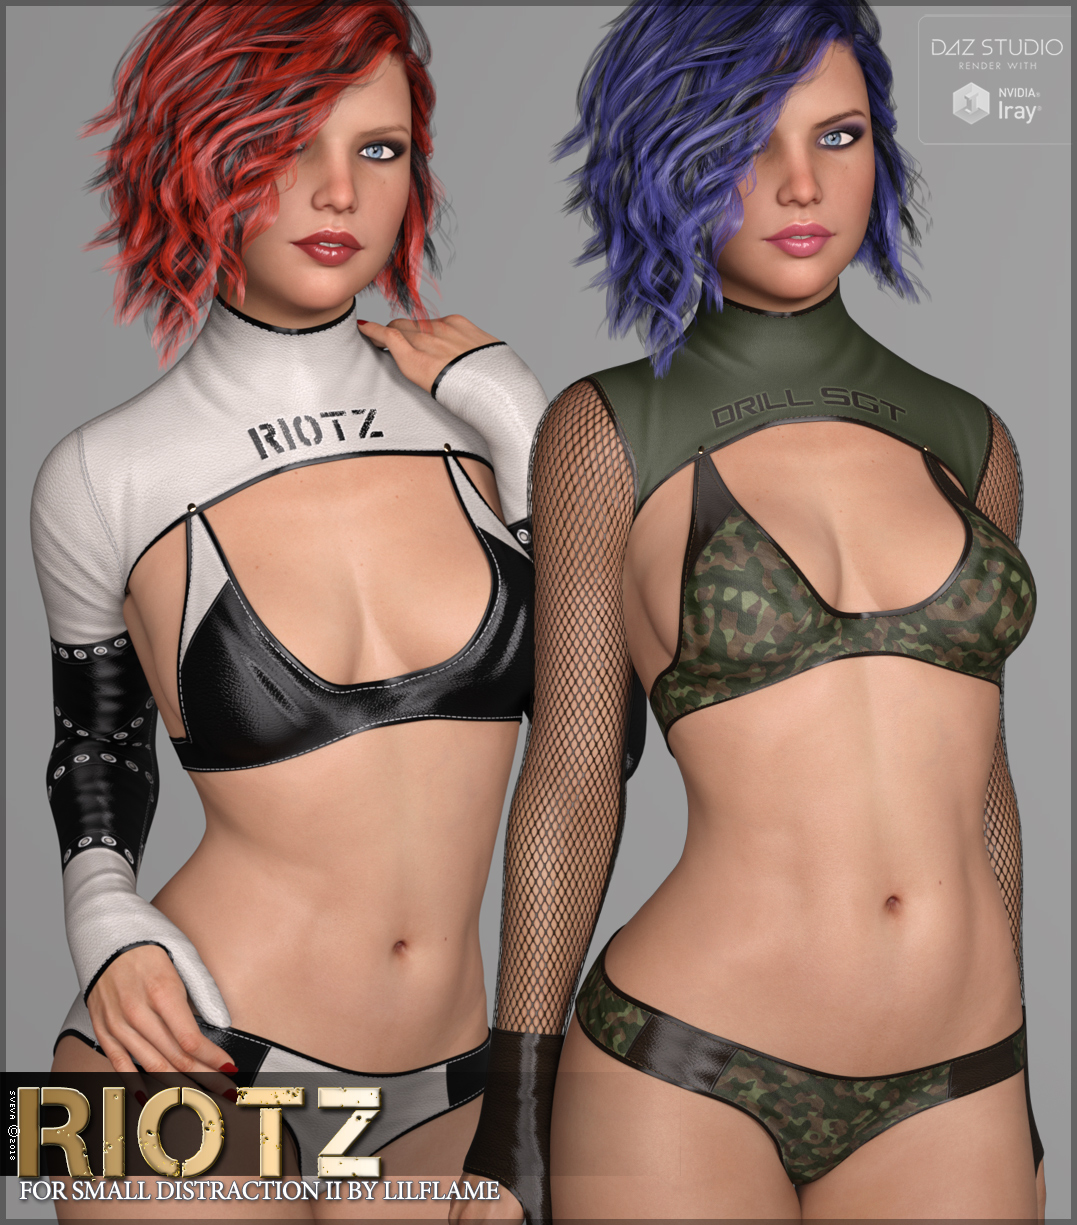 Riotz for Small Distraction II Genesis 8 Females 1711457909